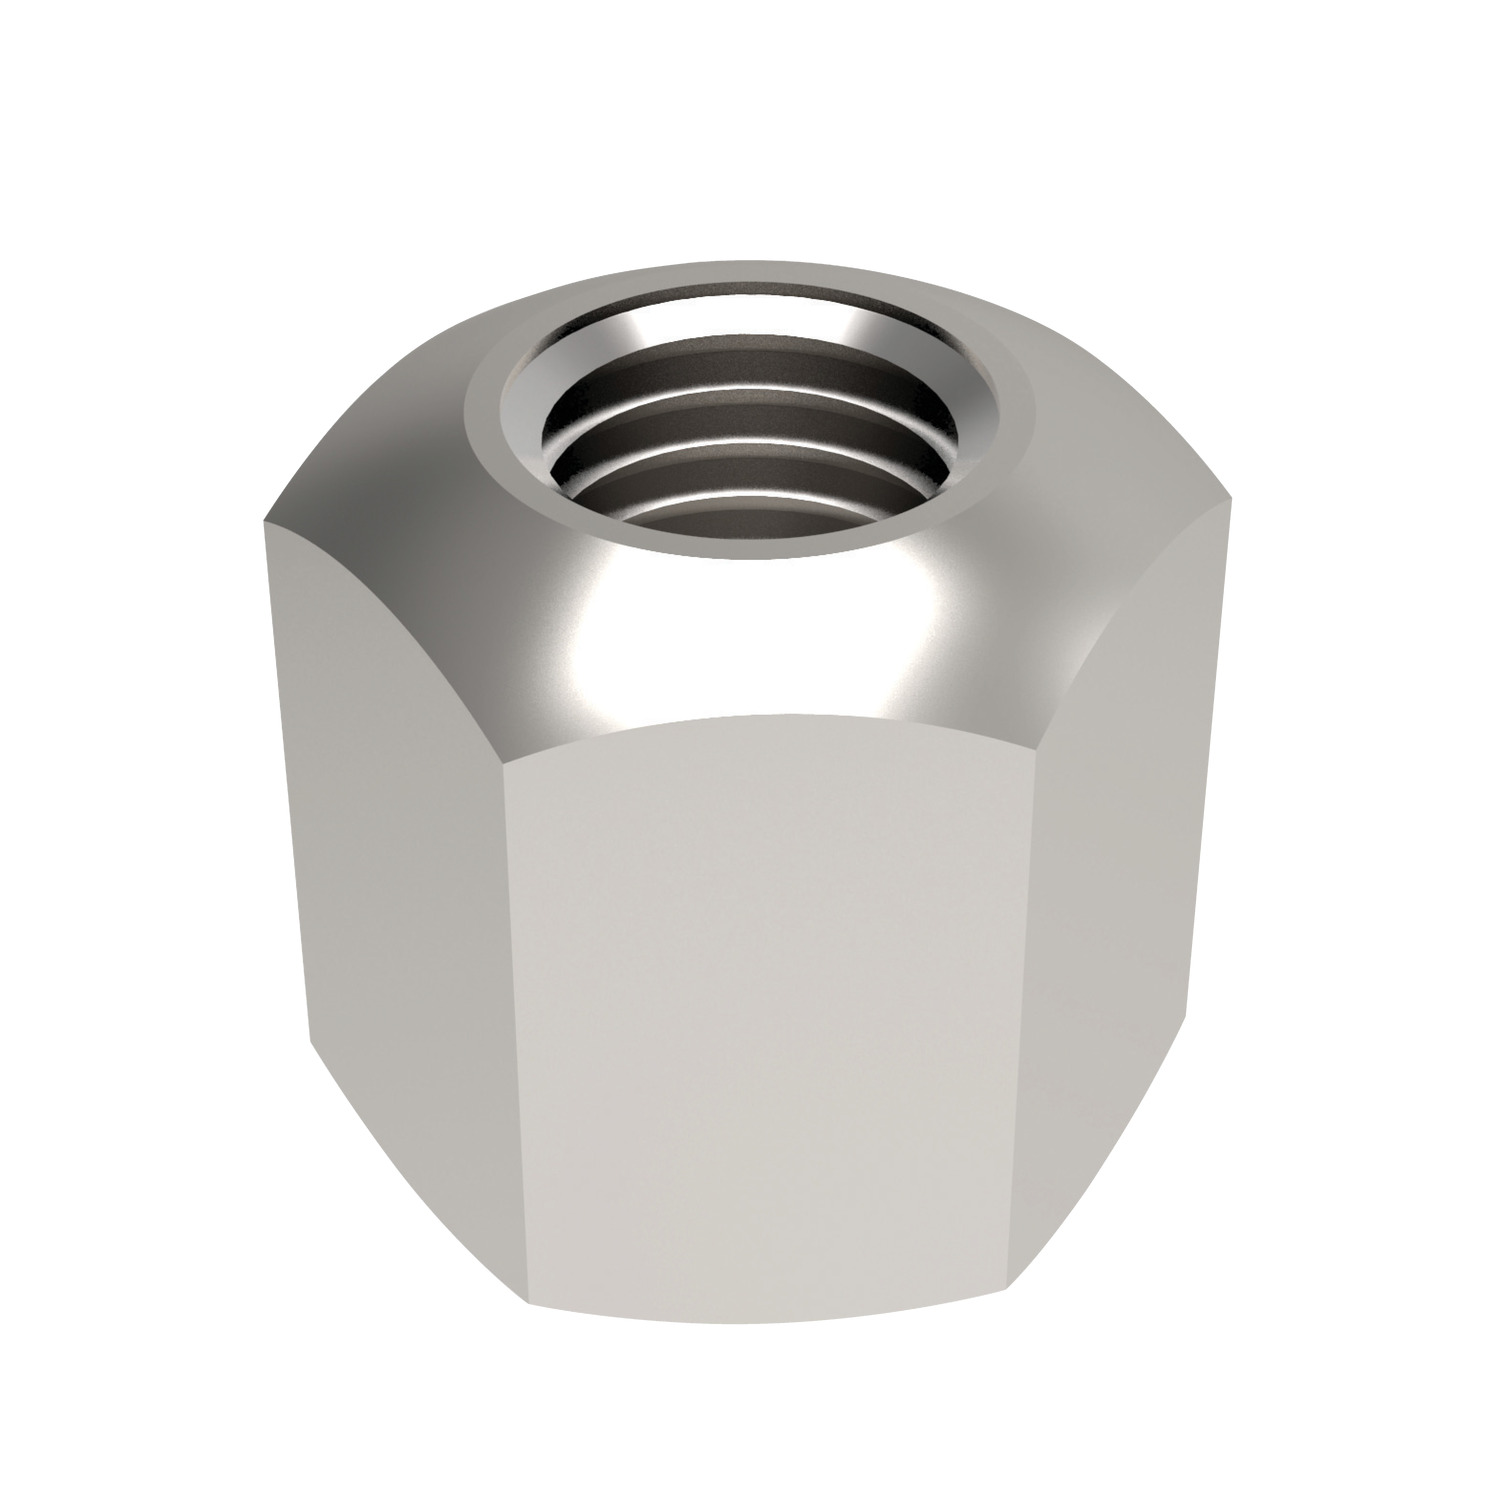 Product 24320, Fixture Nuts stainless steel / 